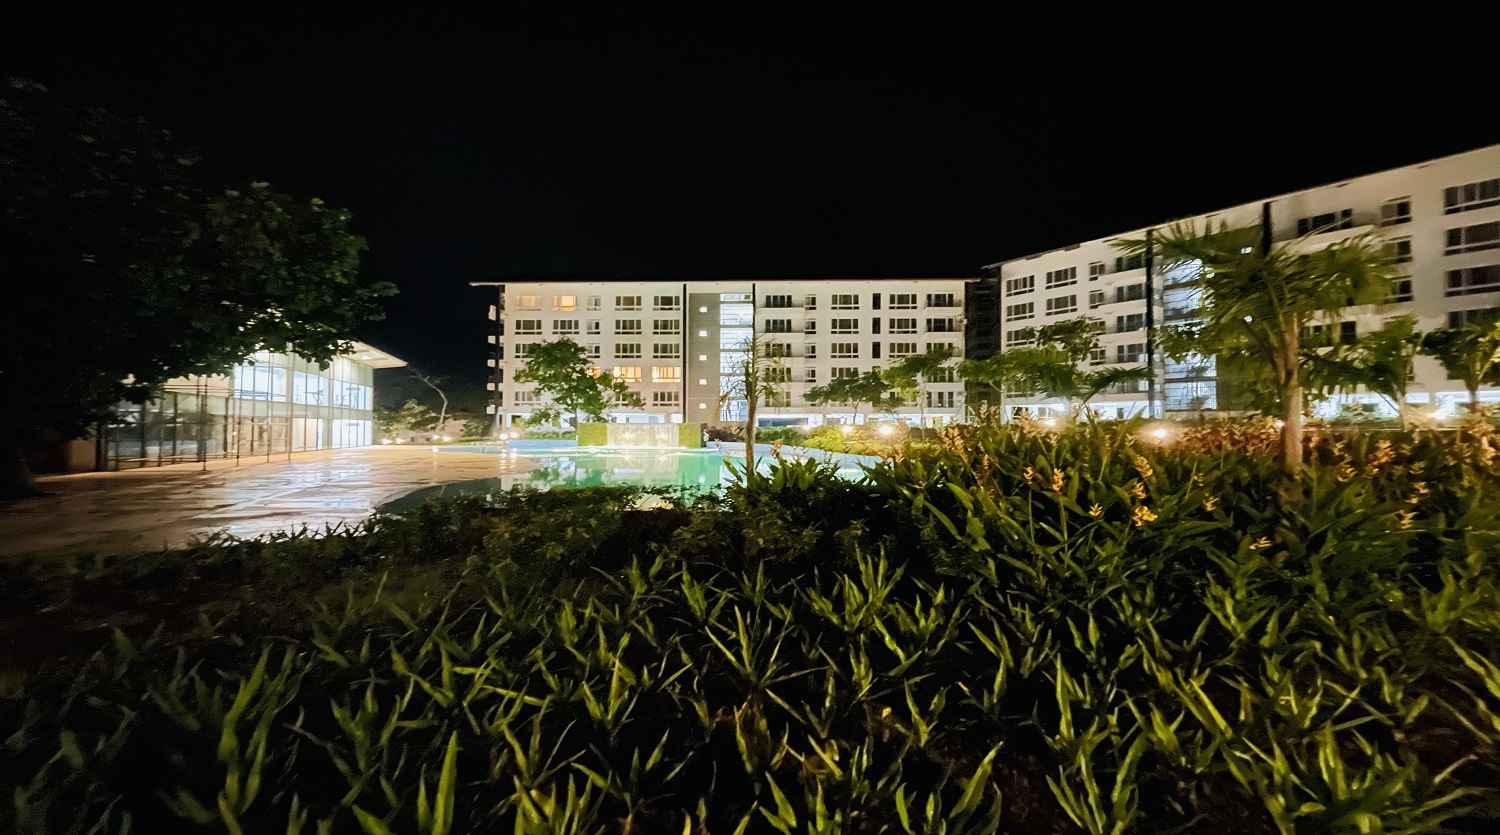 Clubhouse Nightime